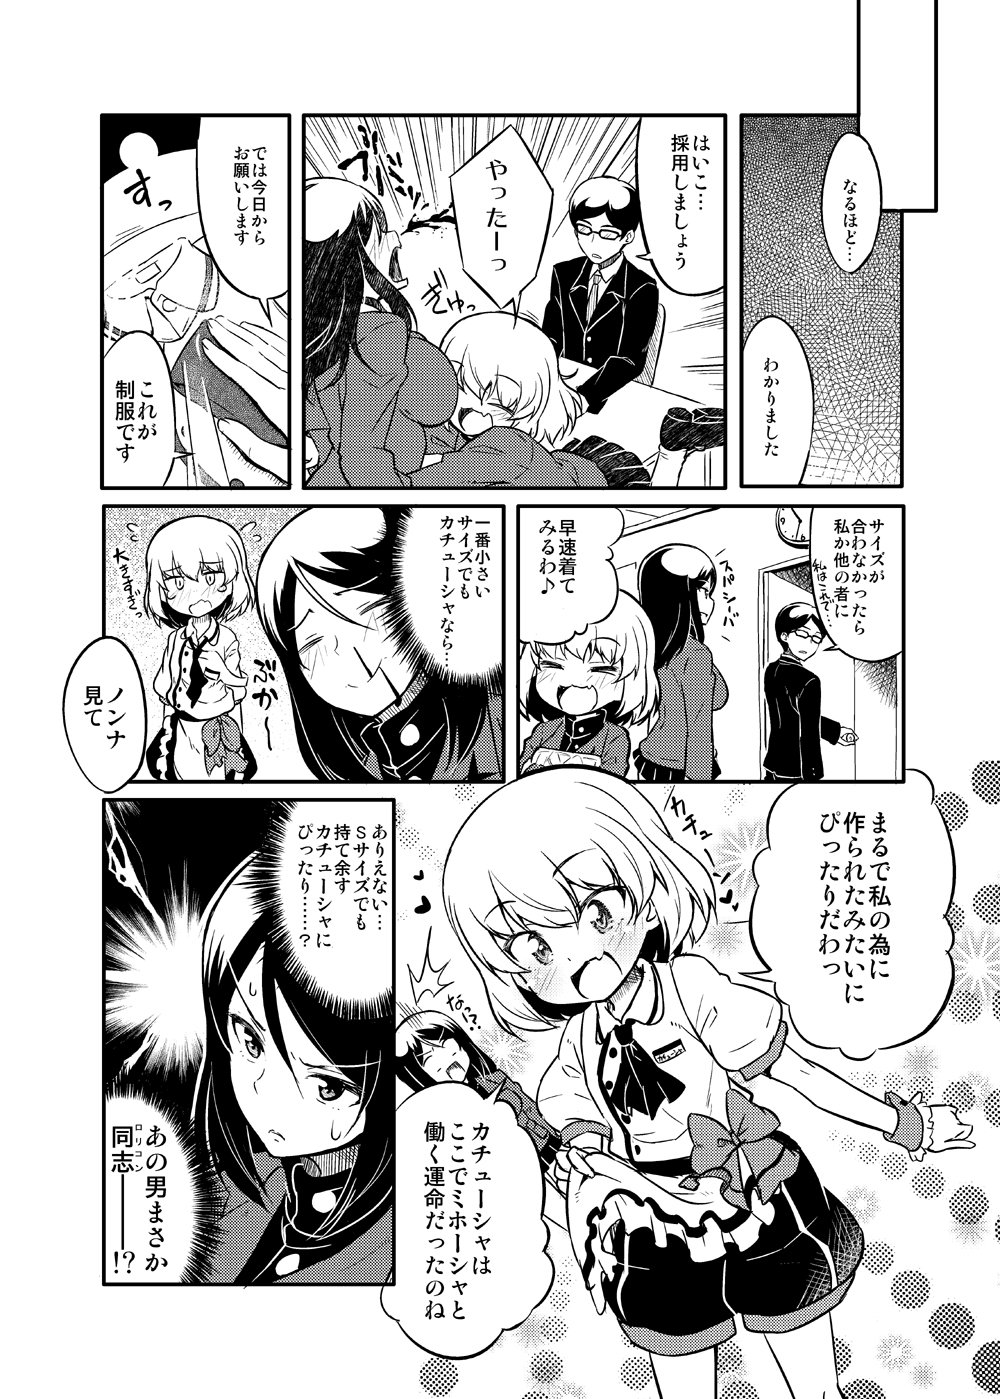 1boy 2girls apron ascot bangs blank_eyes blood blood_on_face blush bow breasts clock closed_eyes coco's comic commentary_request desk employee_uniform fang flying_sweatdrops formal girls_und_panzer glasses greyscale hair_between_eyes heart highres hug imagining jacket kantai_collection katyusha large_breasts long_hair military military_uniform monochrome multiple_girls necktie newtype_flash nonna nosebleed open_mouth opening_door oversized_clothes parted_bangs pleated_skirt short_sleeves shorts sitting skirt smile standing suit suit_jacket surprised sw sweat tearing_up translation_request tsuji_renta uniform